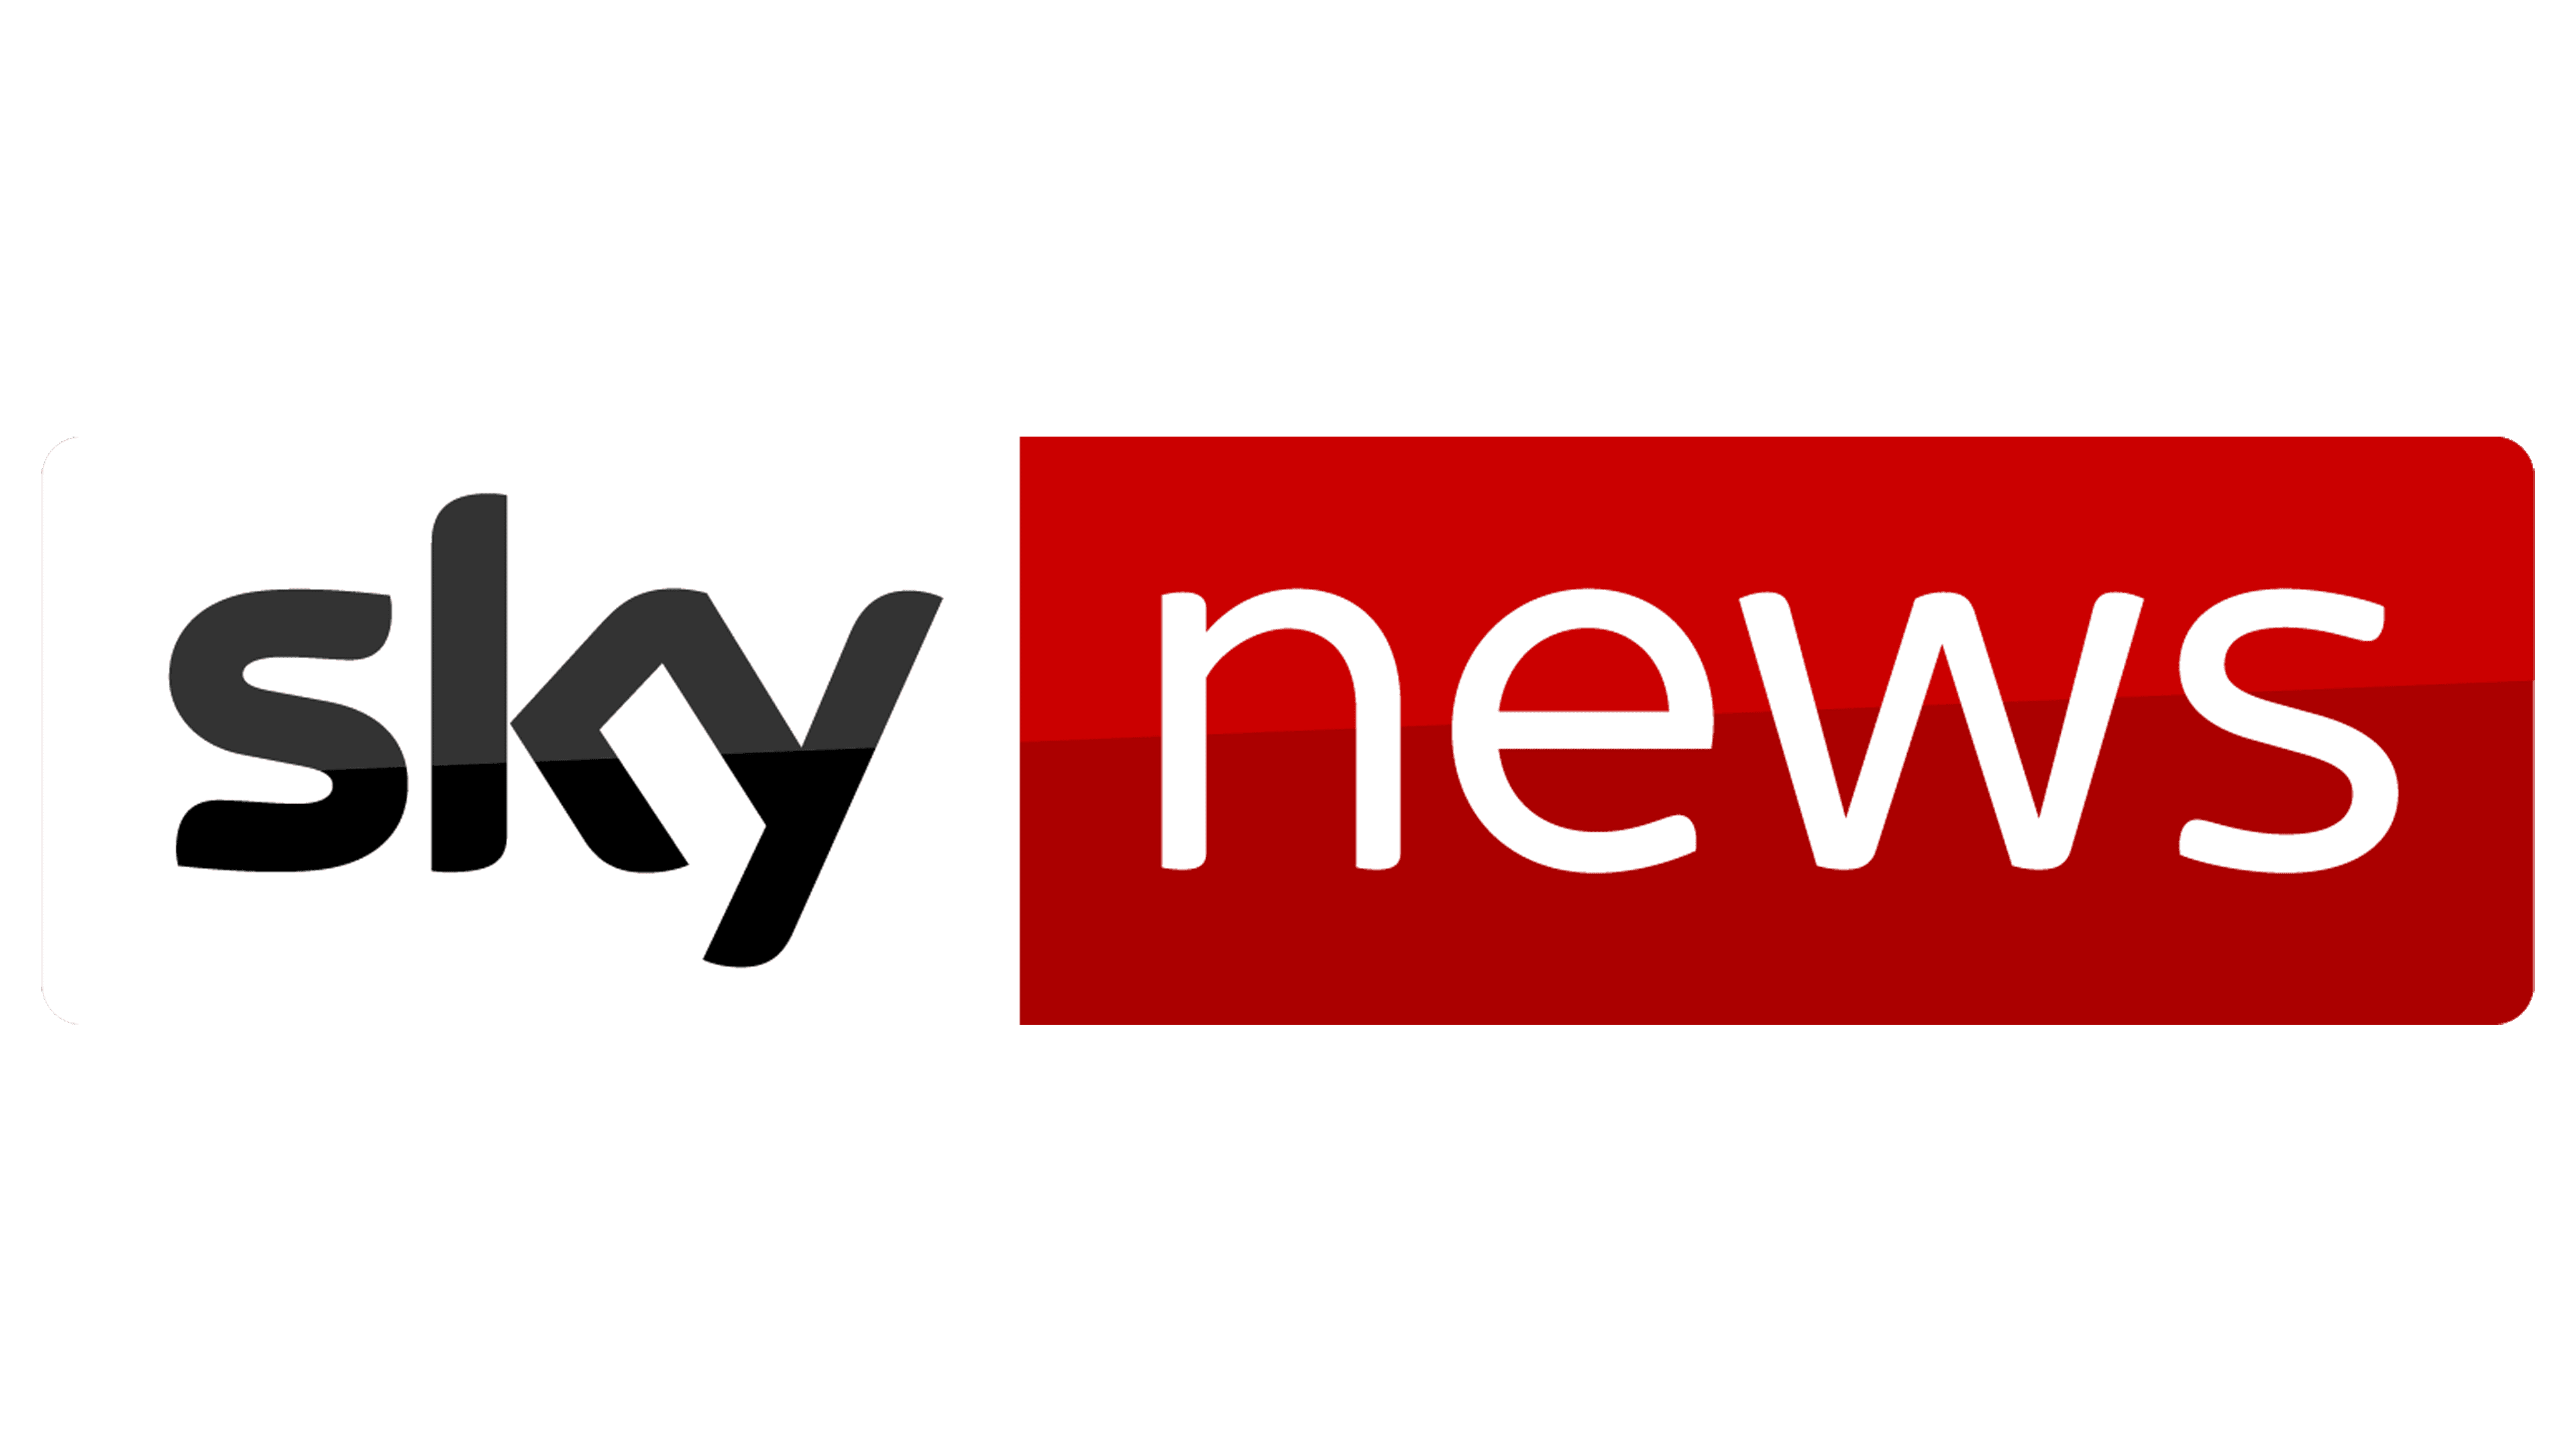 License your Sky News executive interviews with Display Rights